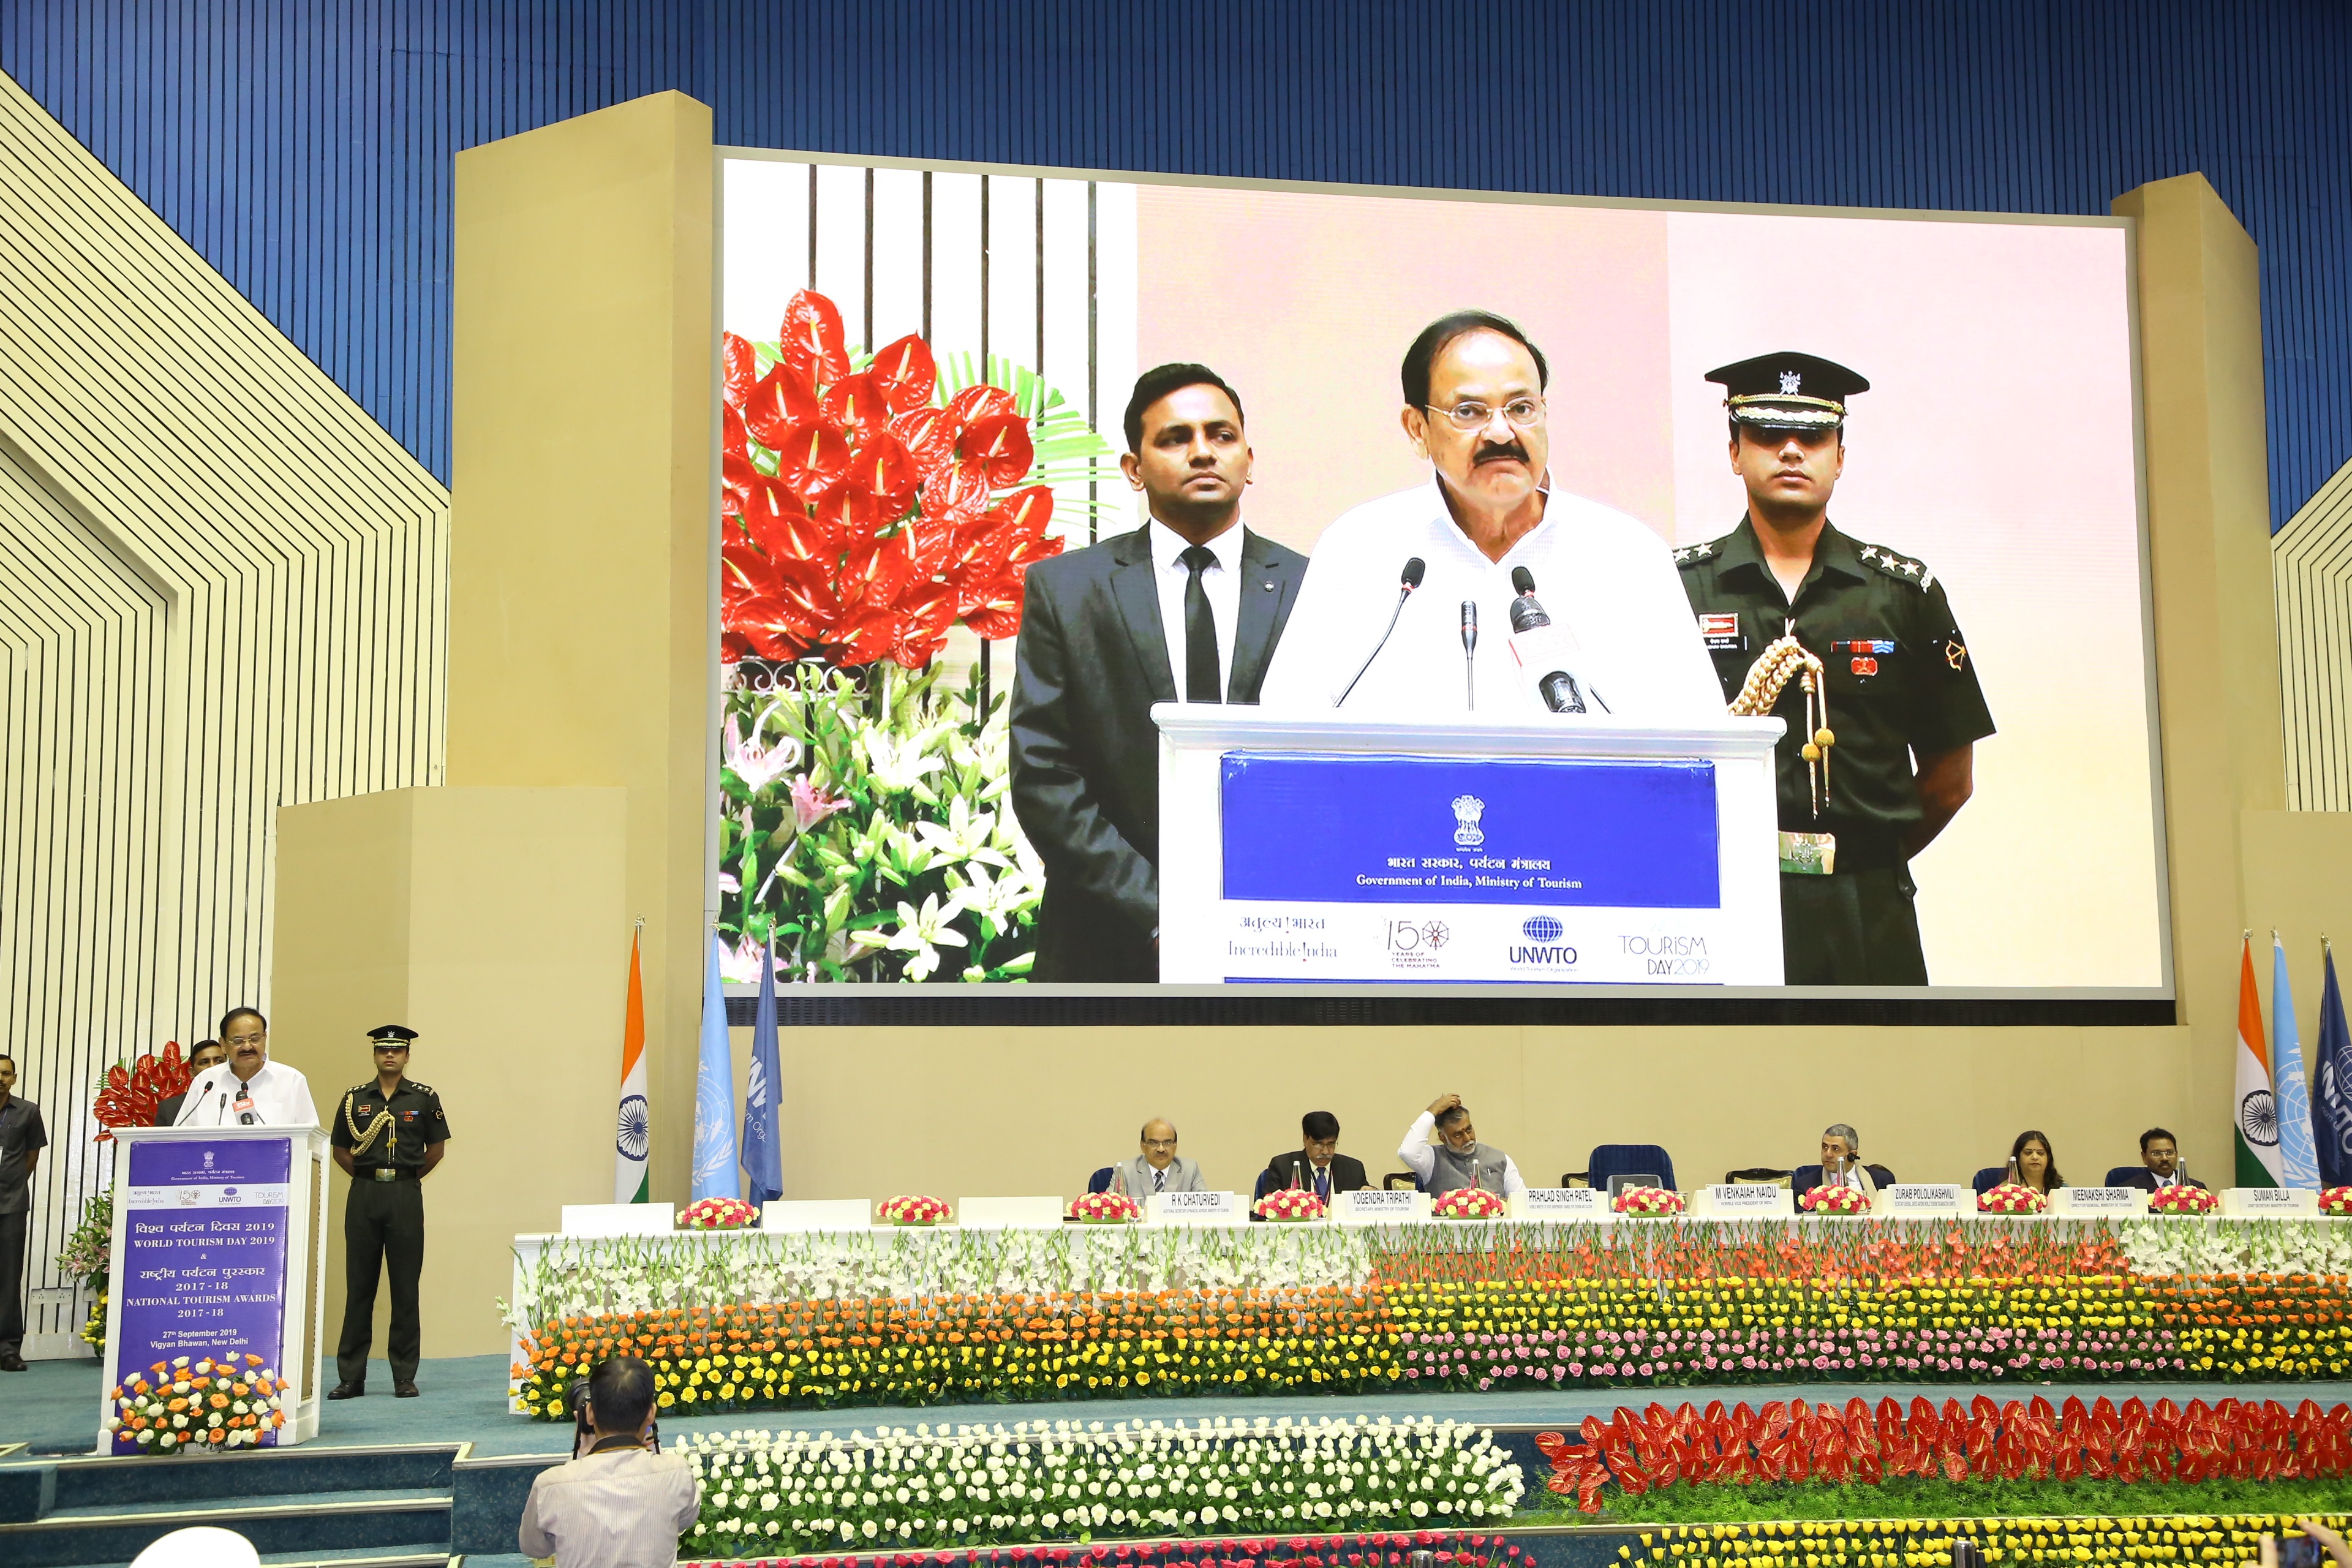 The World Tourism Day celebration & National Tourism Awards function was organized in New Delhi on 27 Sept, 2019. Hon’ble Vice President of India was the Chief Guest at the event, which was presided over by Hon’ble Tourism Minister of India in the presence of Secretary-General, UNWTO.